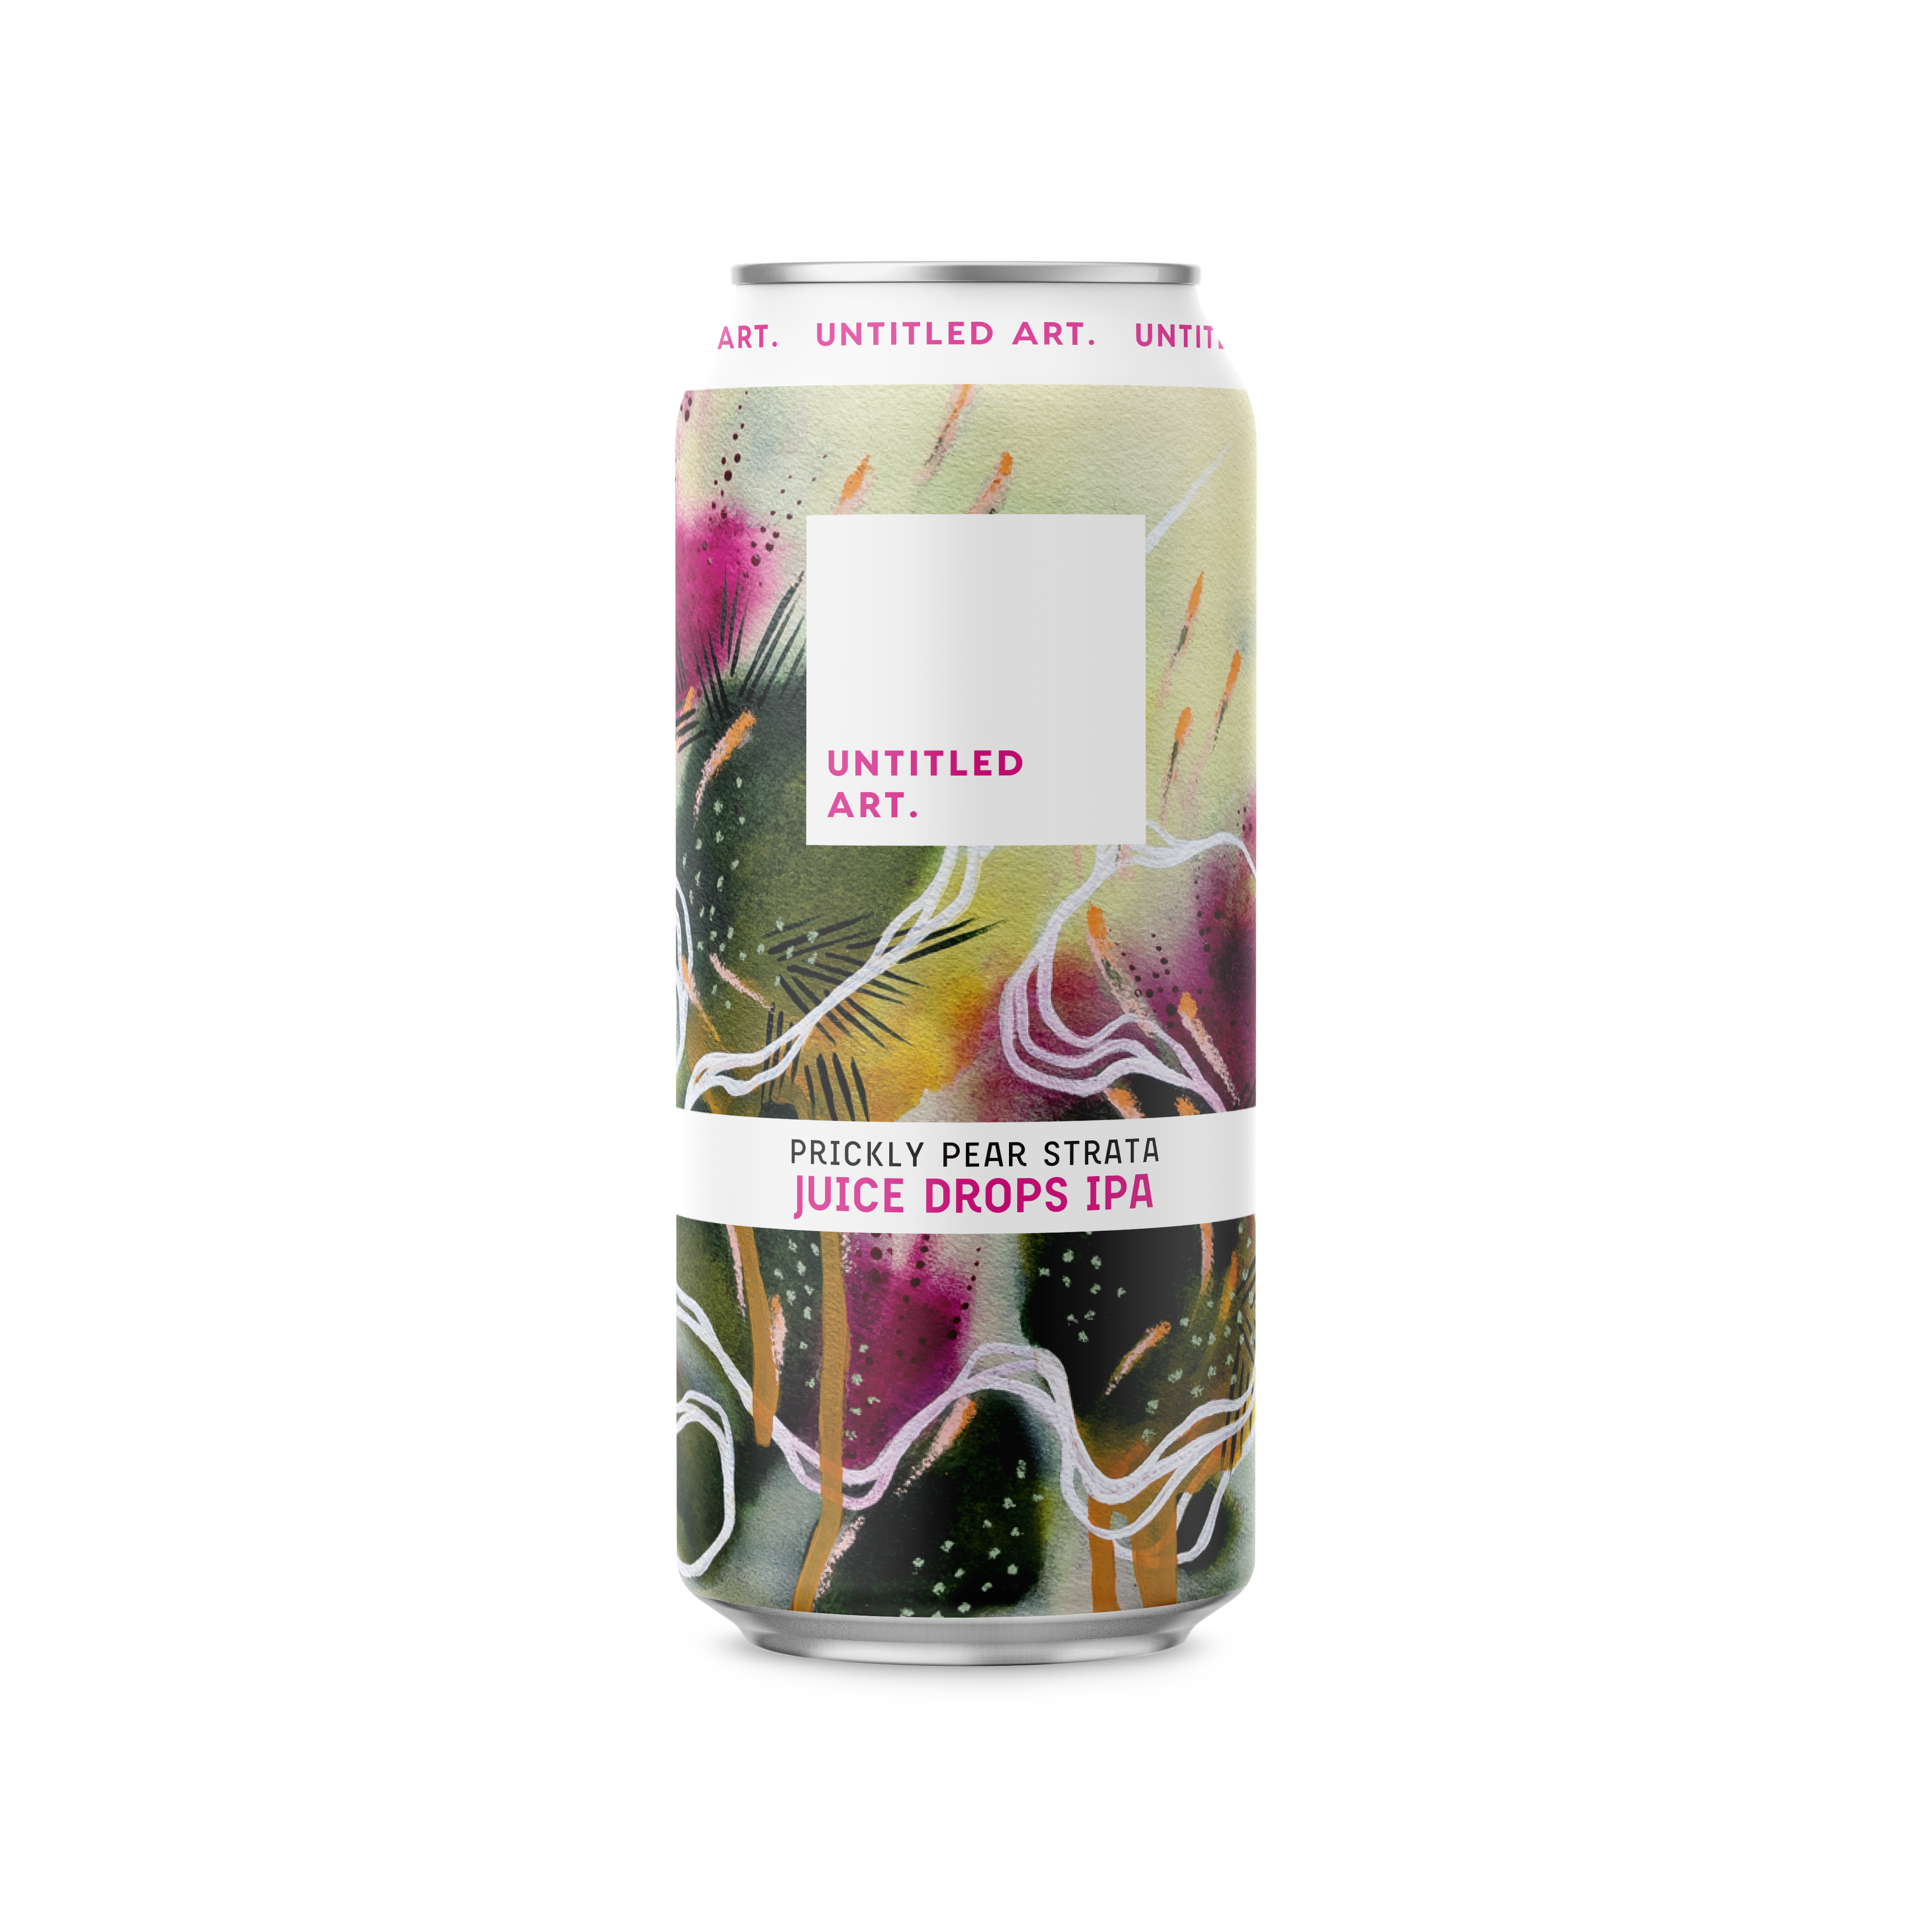 A can of a drink with a flower on it.